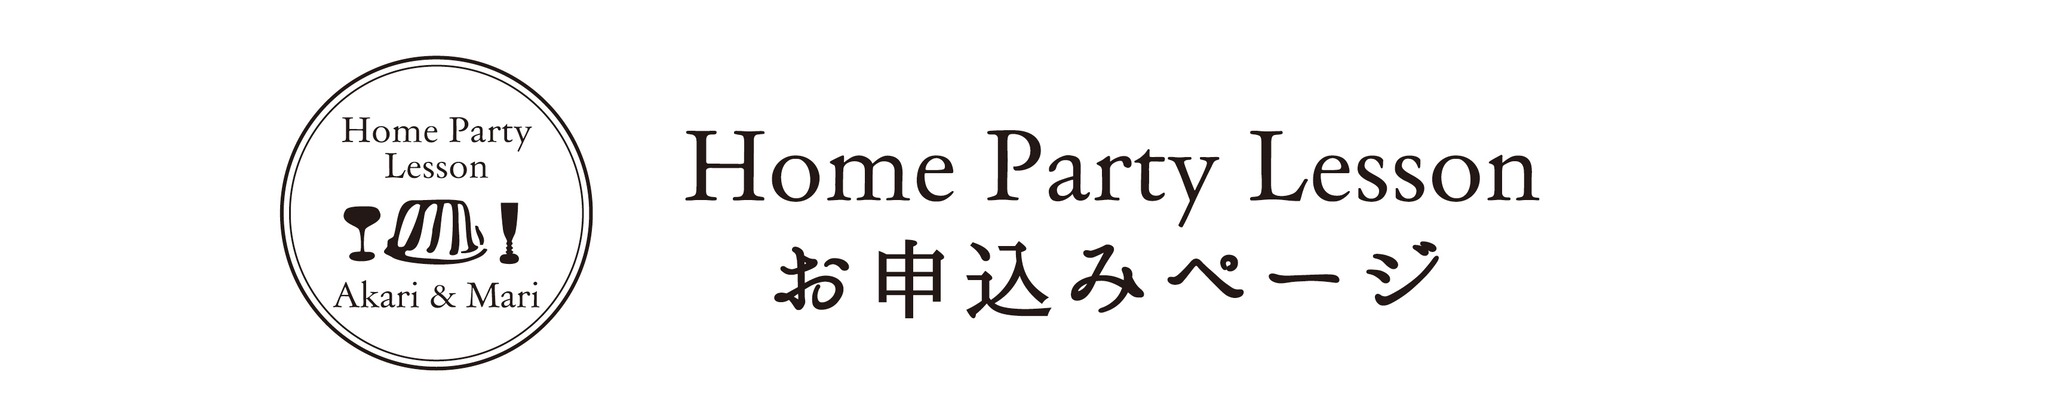 Home Party Lesson